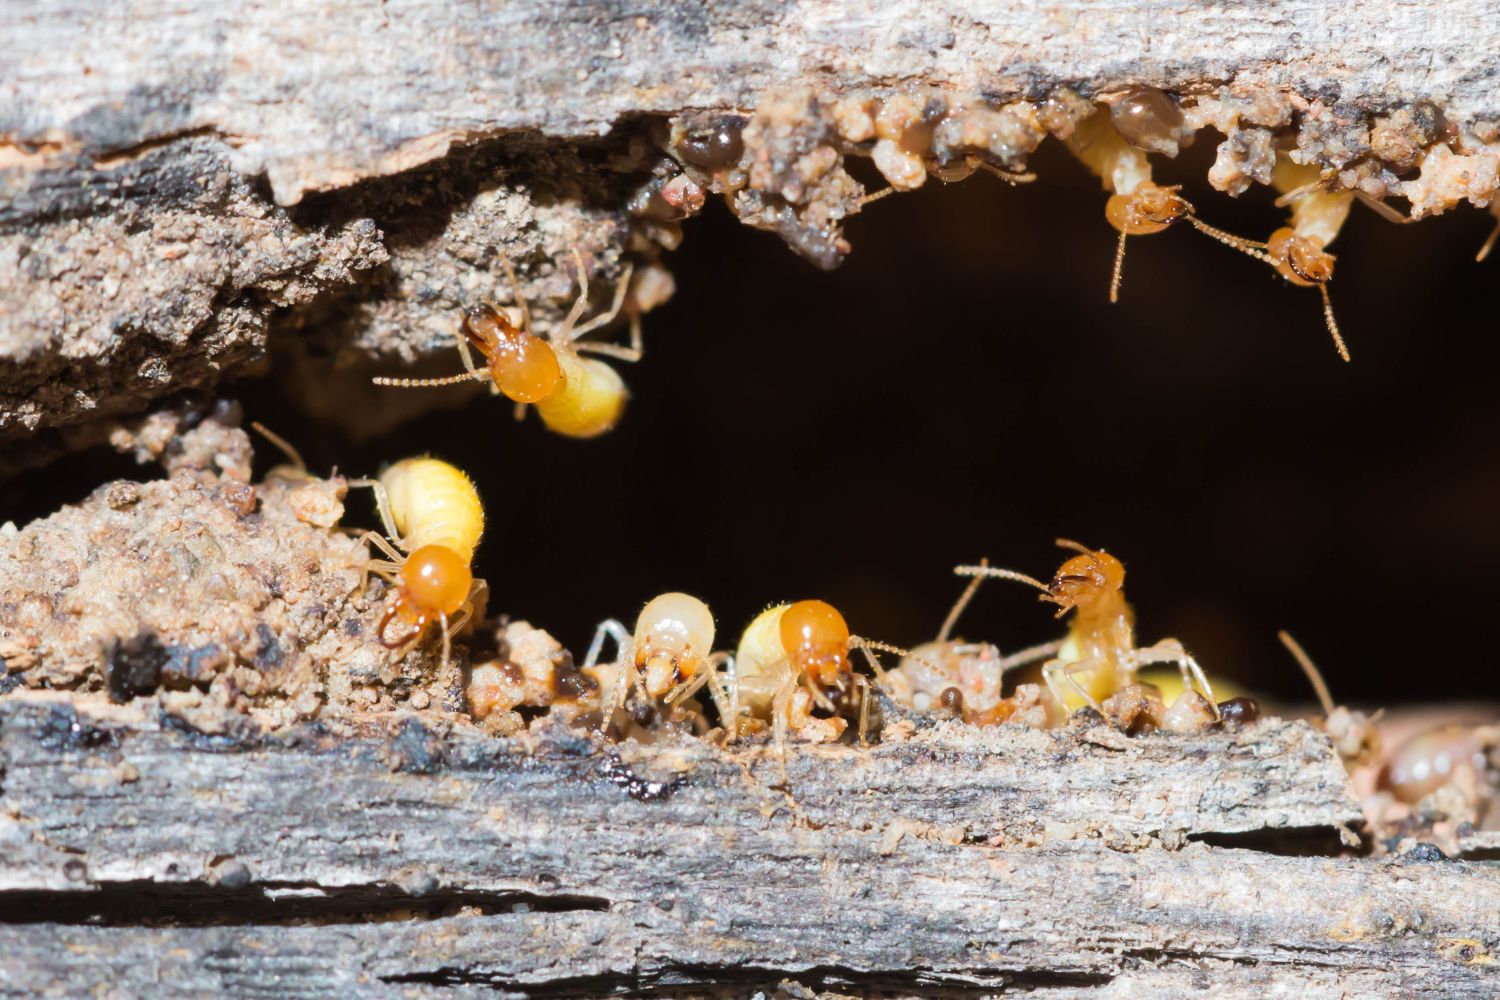 Where do Termites Come From